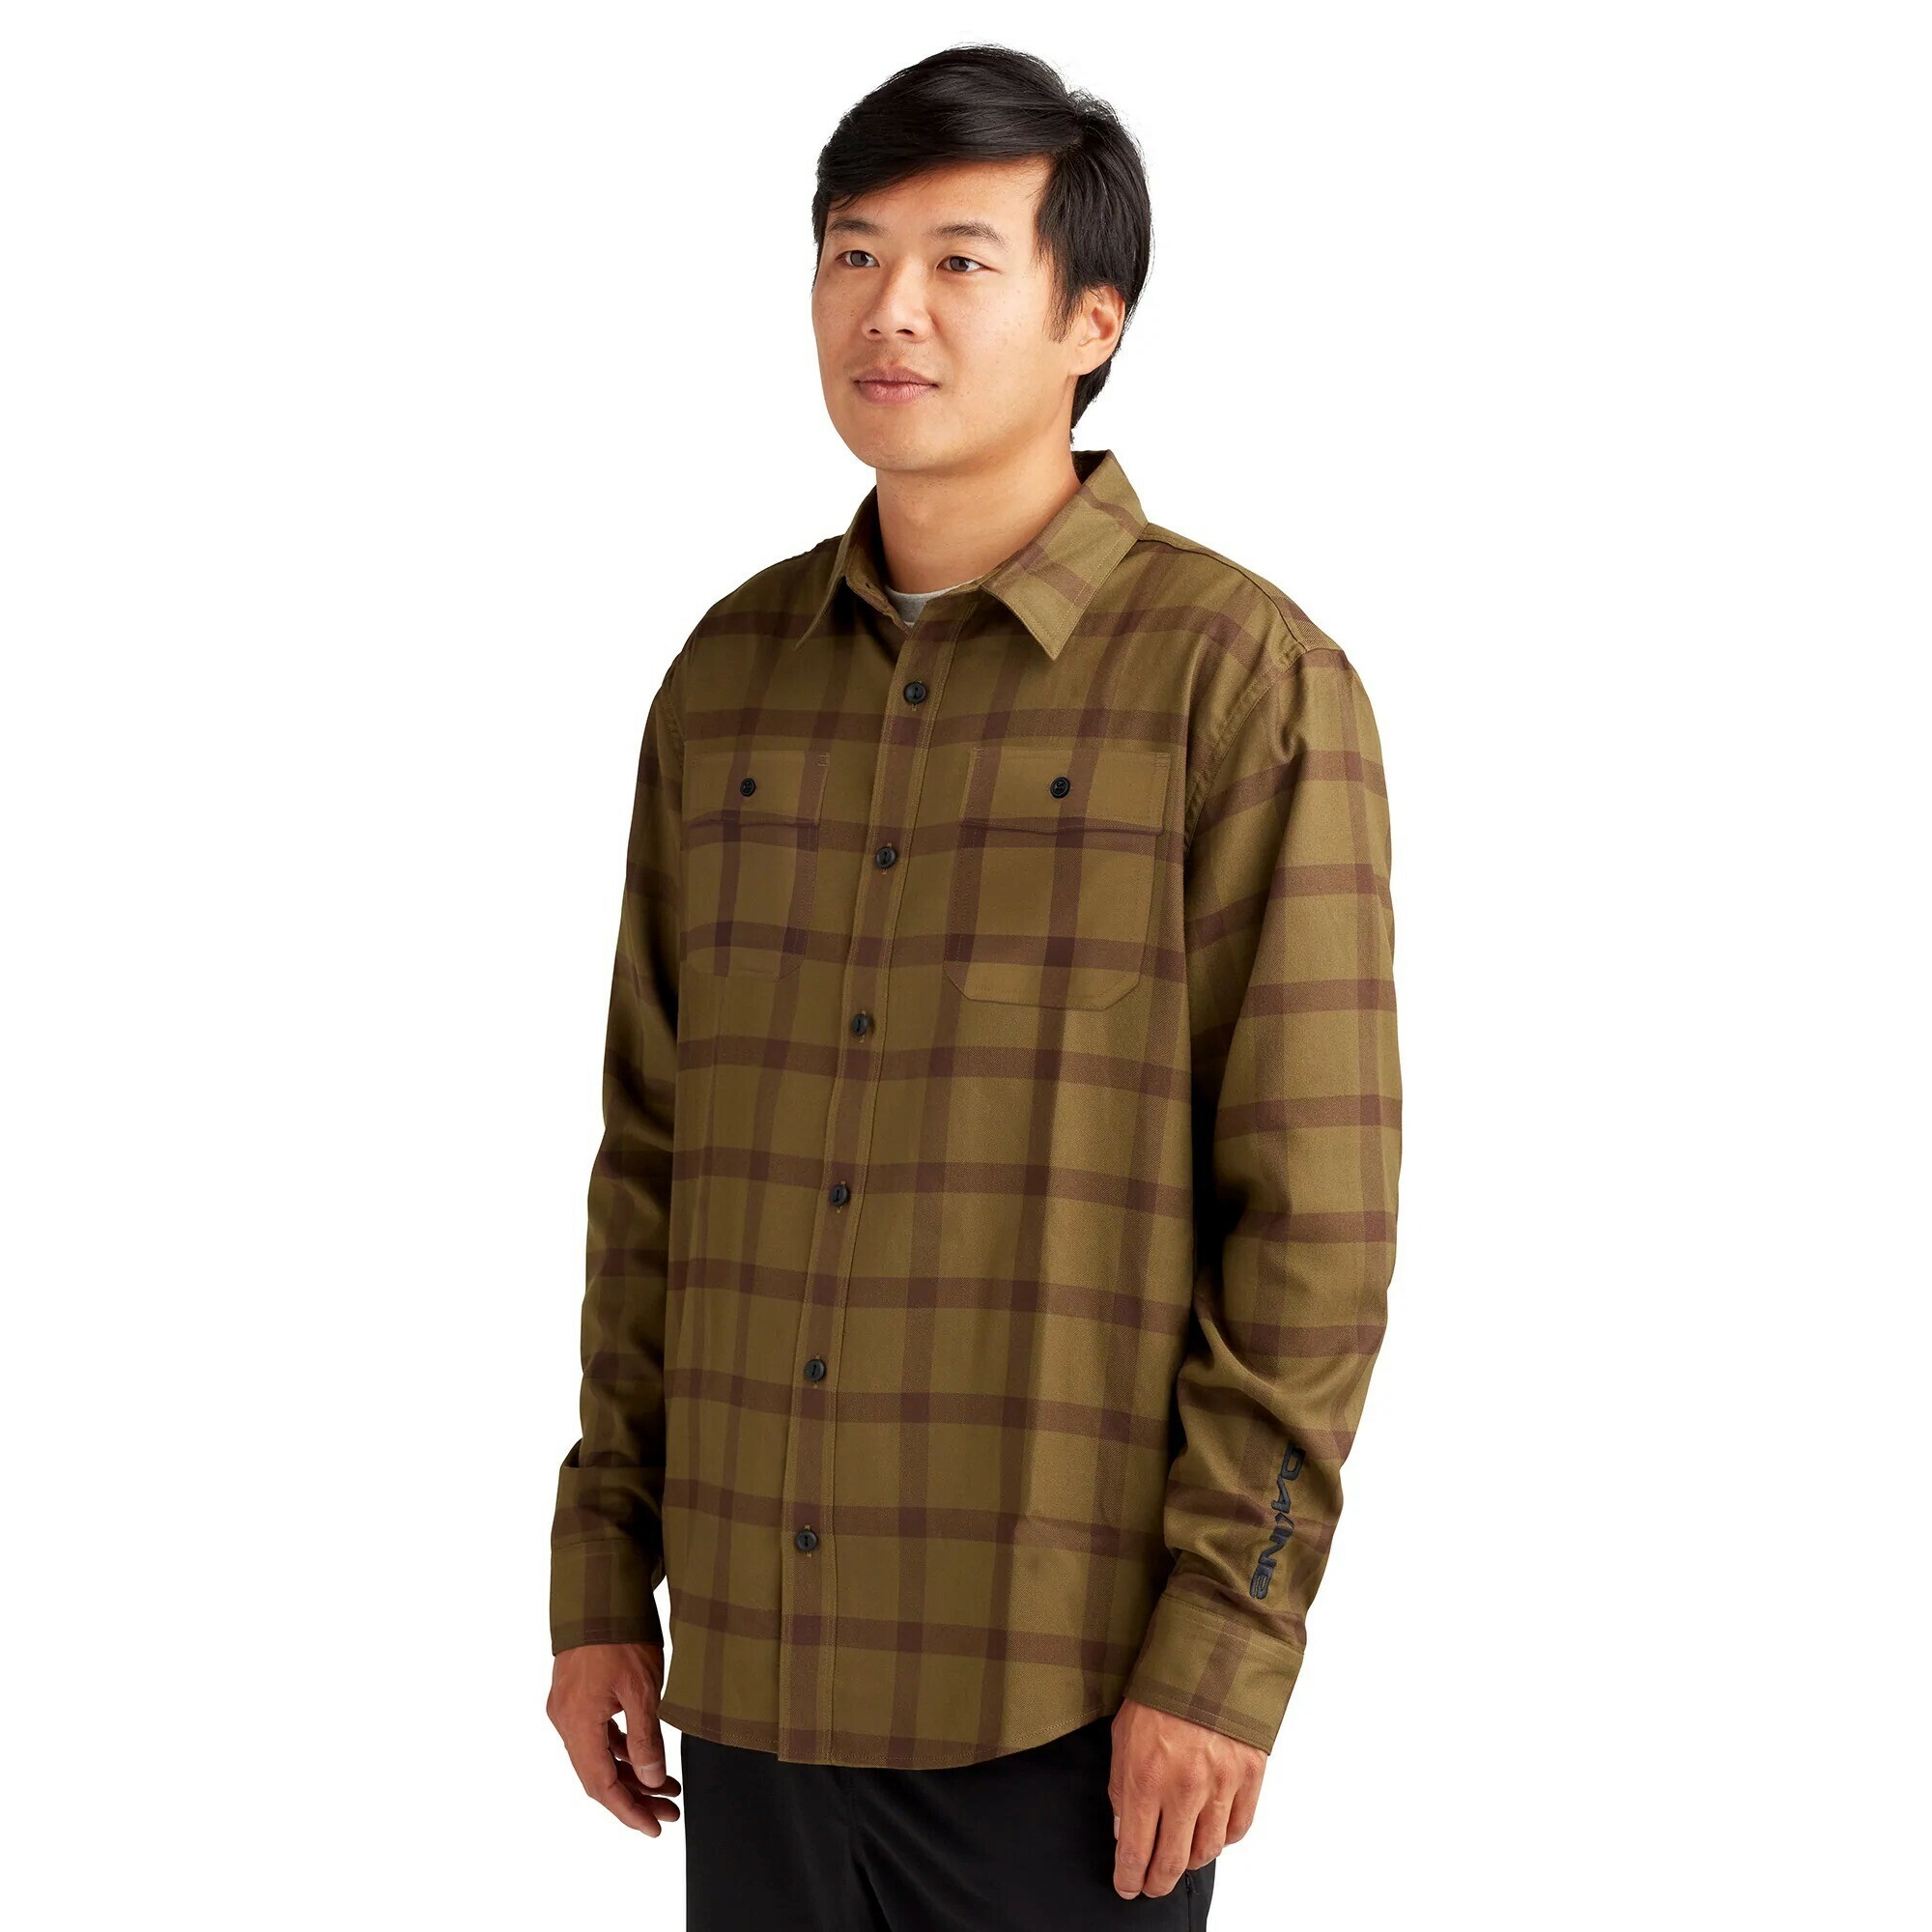 CHARGER FLANNEL SHIRT